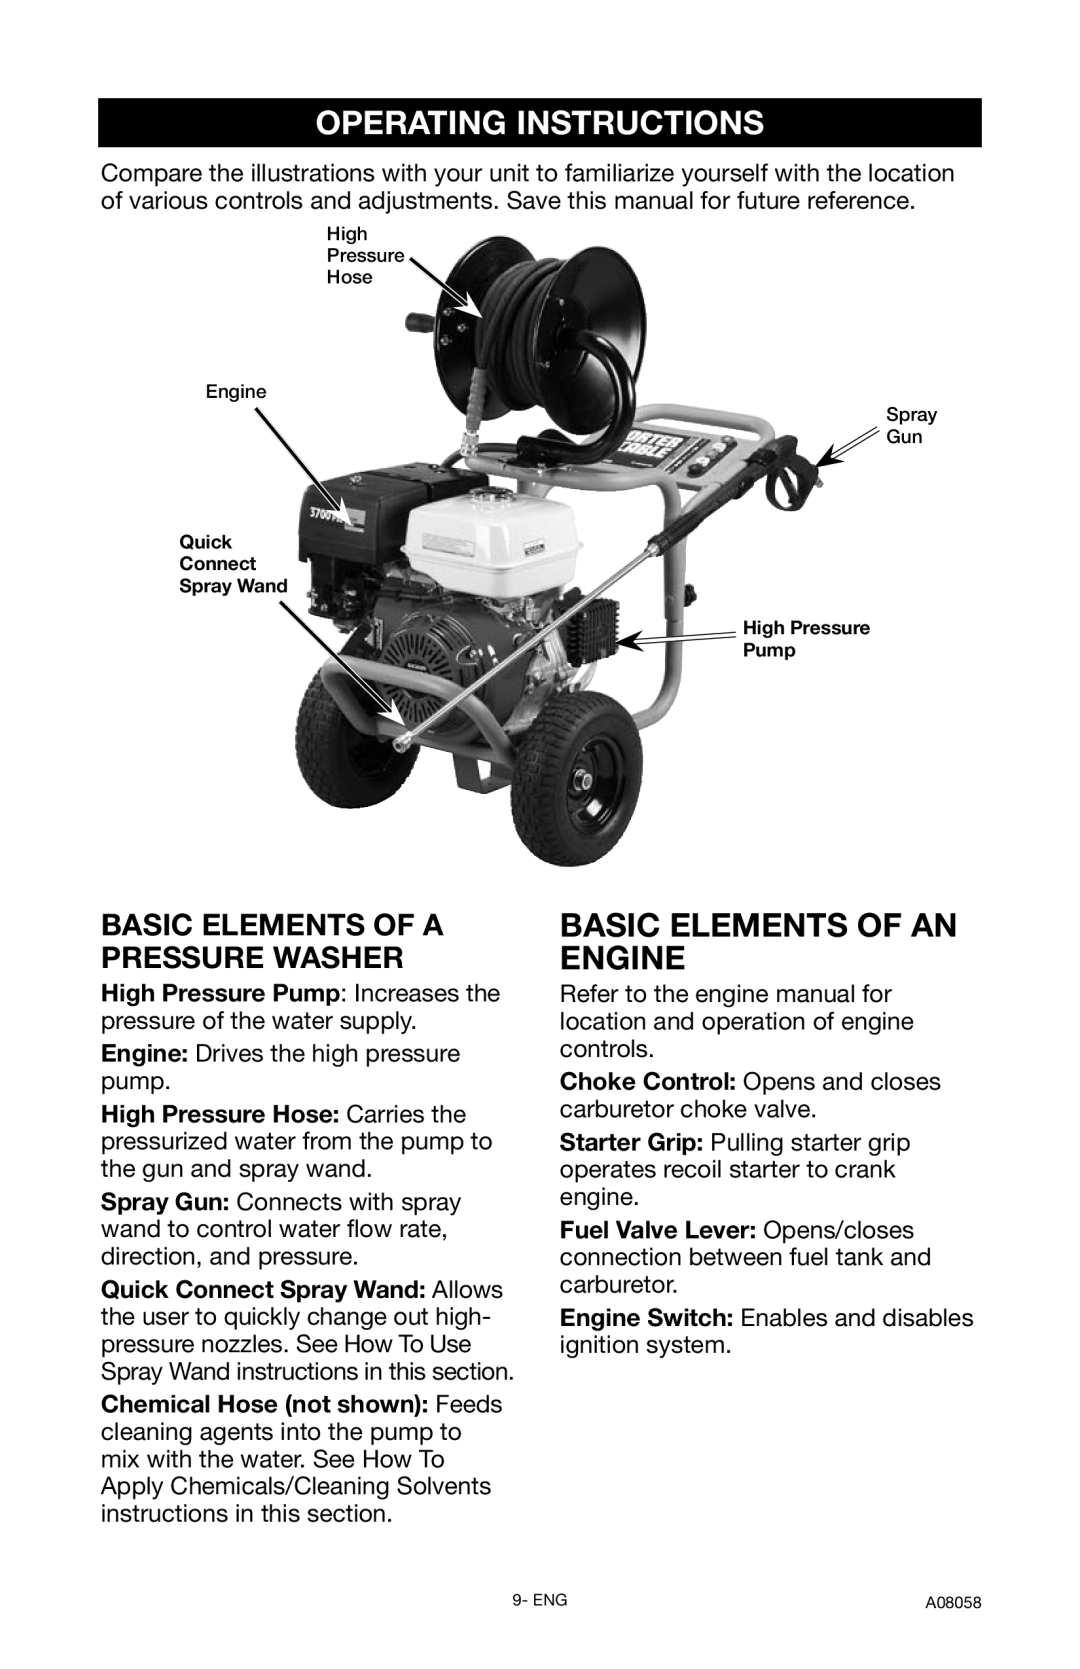 Porter-Cable A08058-0412-0 Operating Instructions, Basic Elements Of A Pressure Washer, Basic Elements Of An Engine 